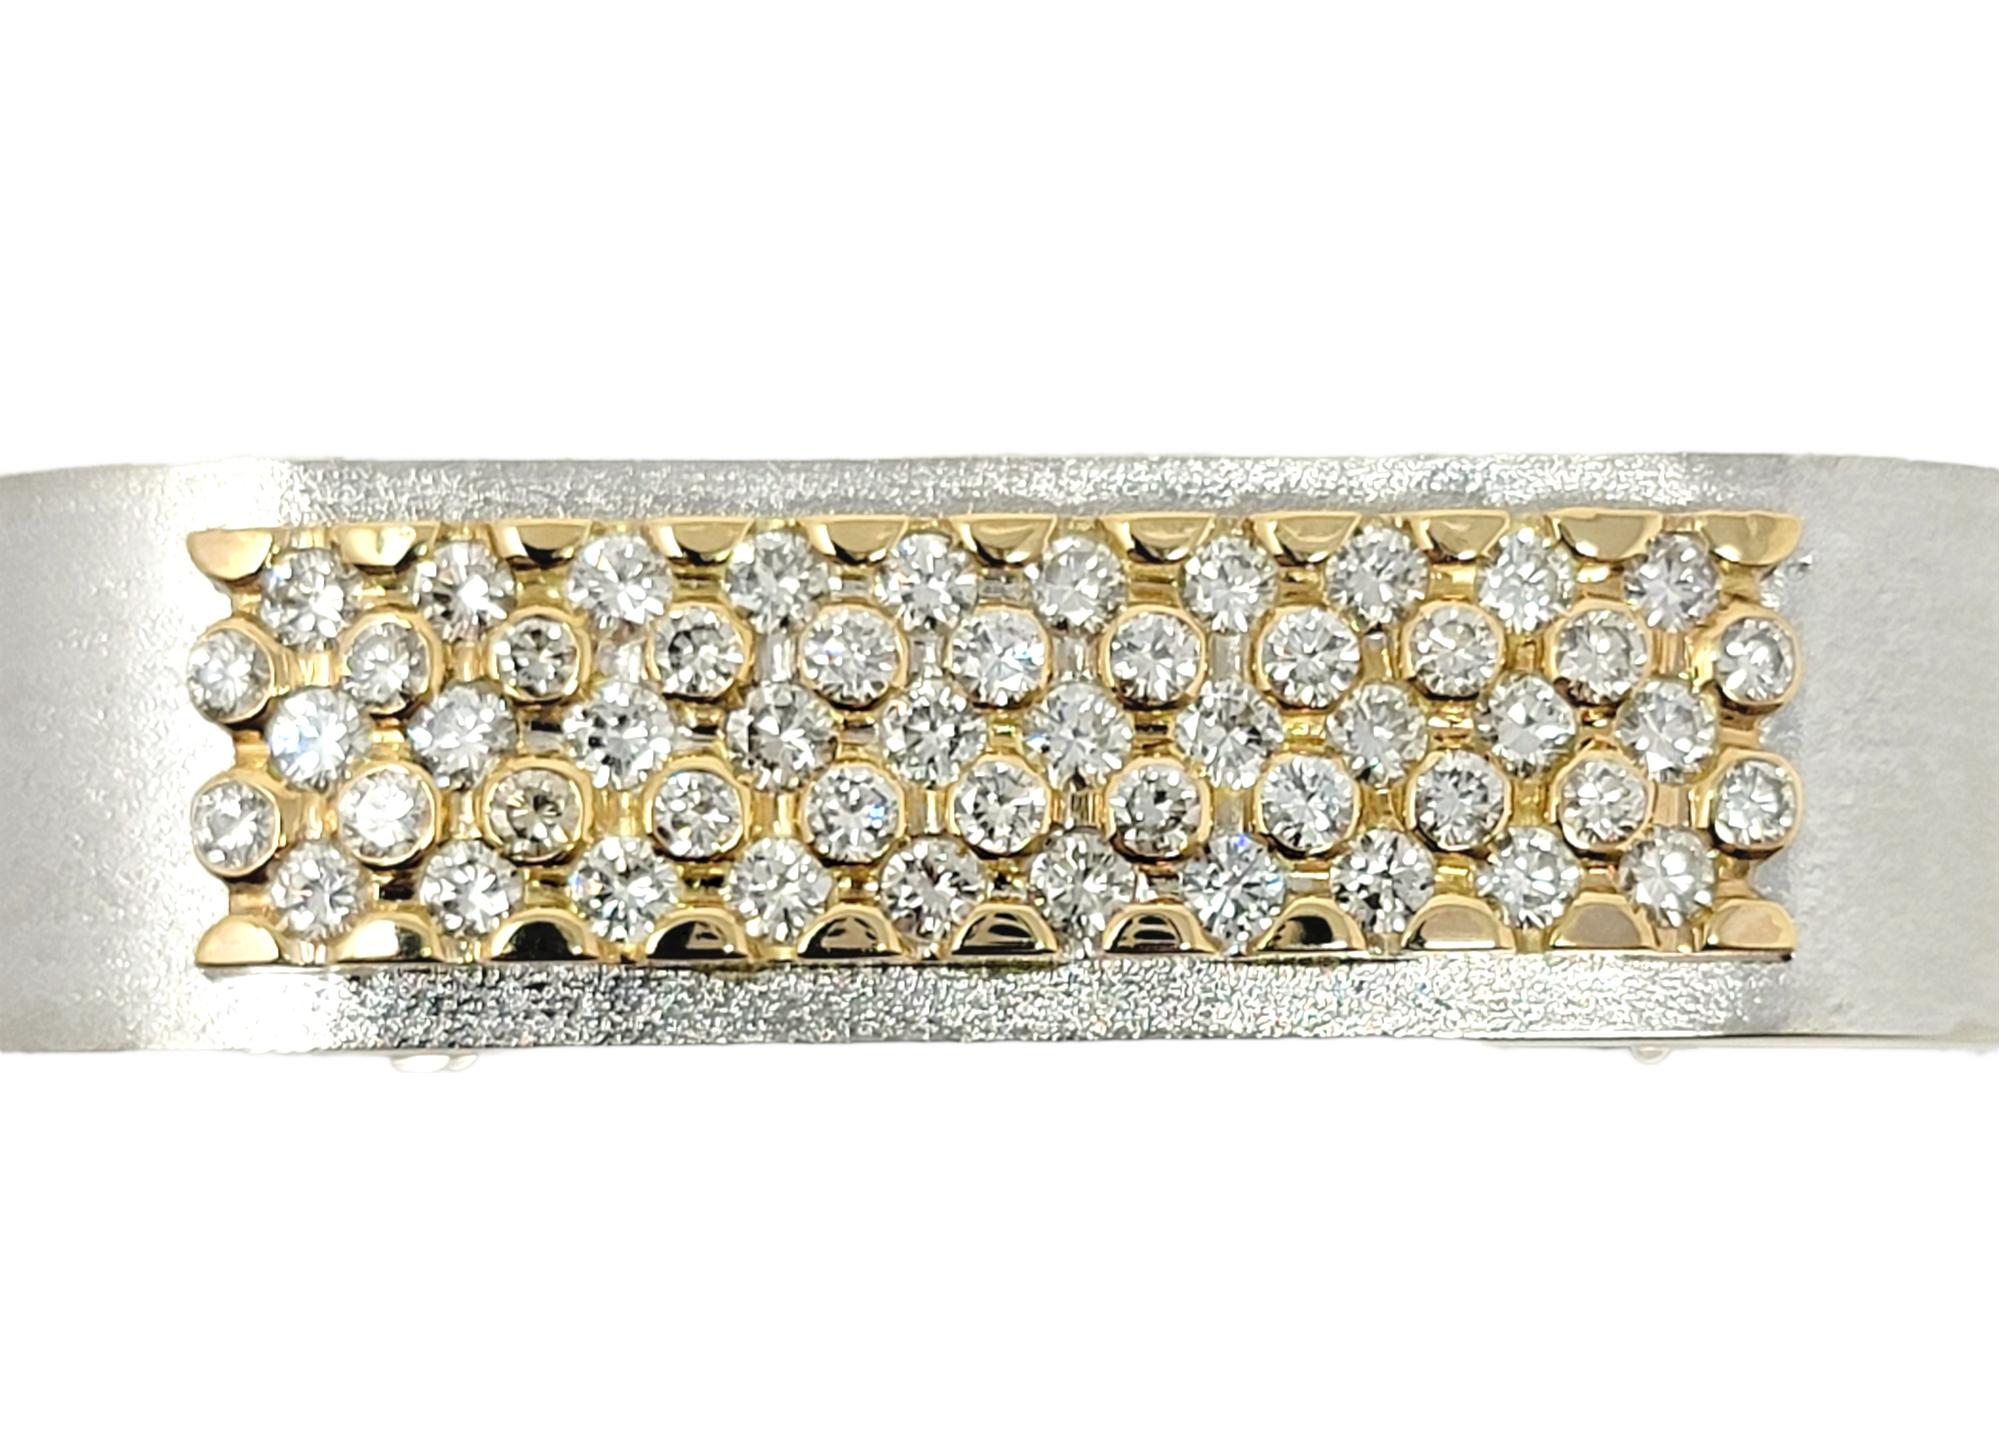 Contemporary Diamond 5 Row Cuff Bracelet in Brushed 14 Karat Two Tone Gold In Good Condition For Sale In Scottsdale, AZ